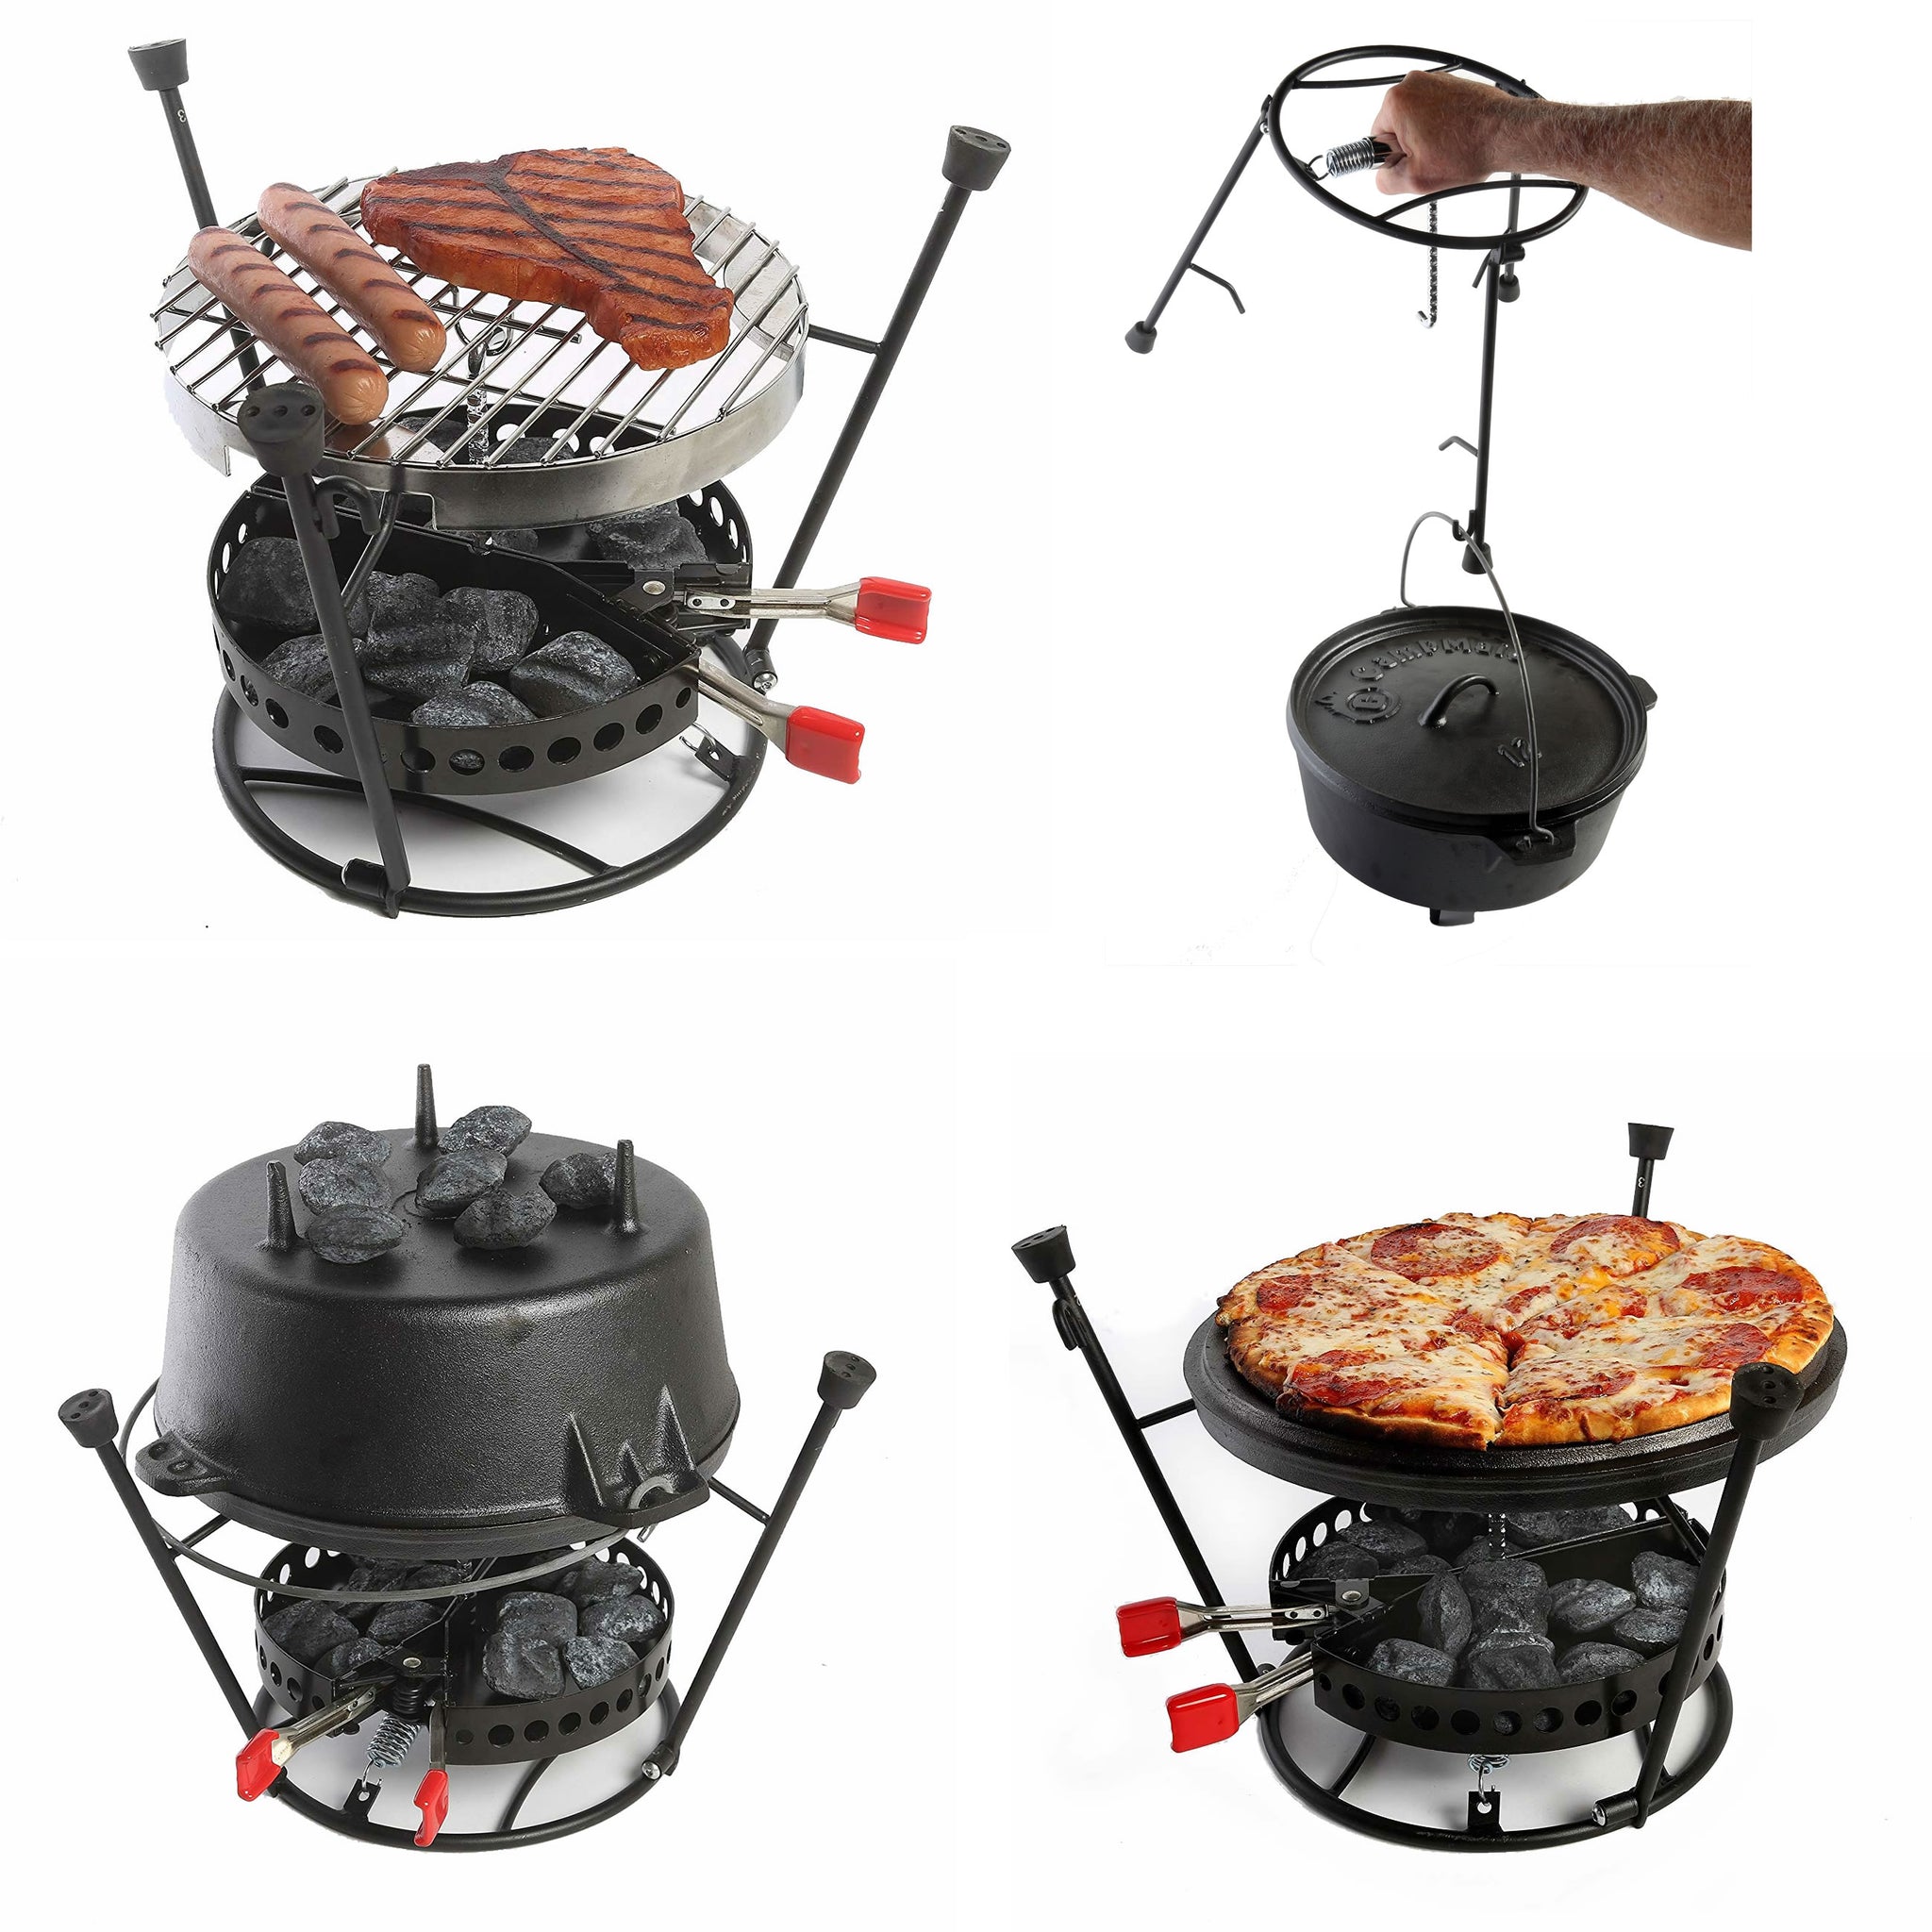 Campmaid Outdoor Cooking Set - Dutch Oven and Tools Set - Charcoal Holder & Cast Iron Grill Accessories - Camping Grill Set - Outdoor Cooking